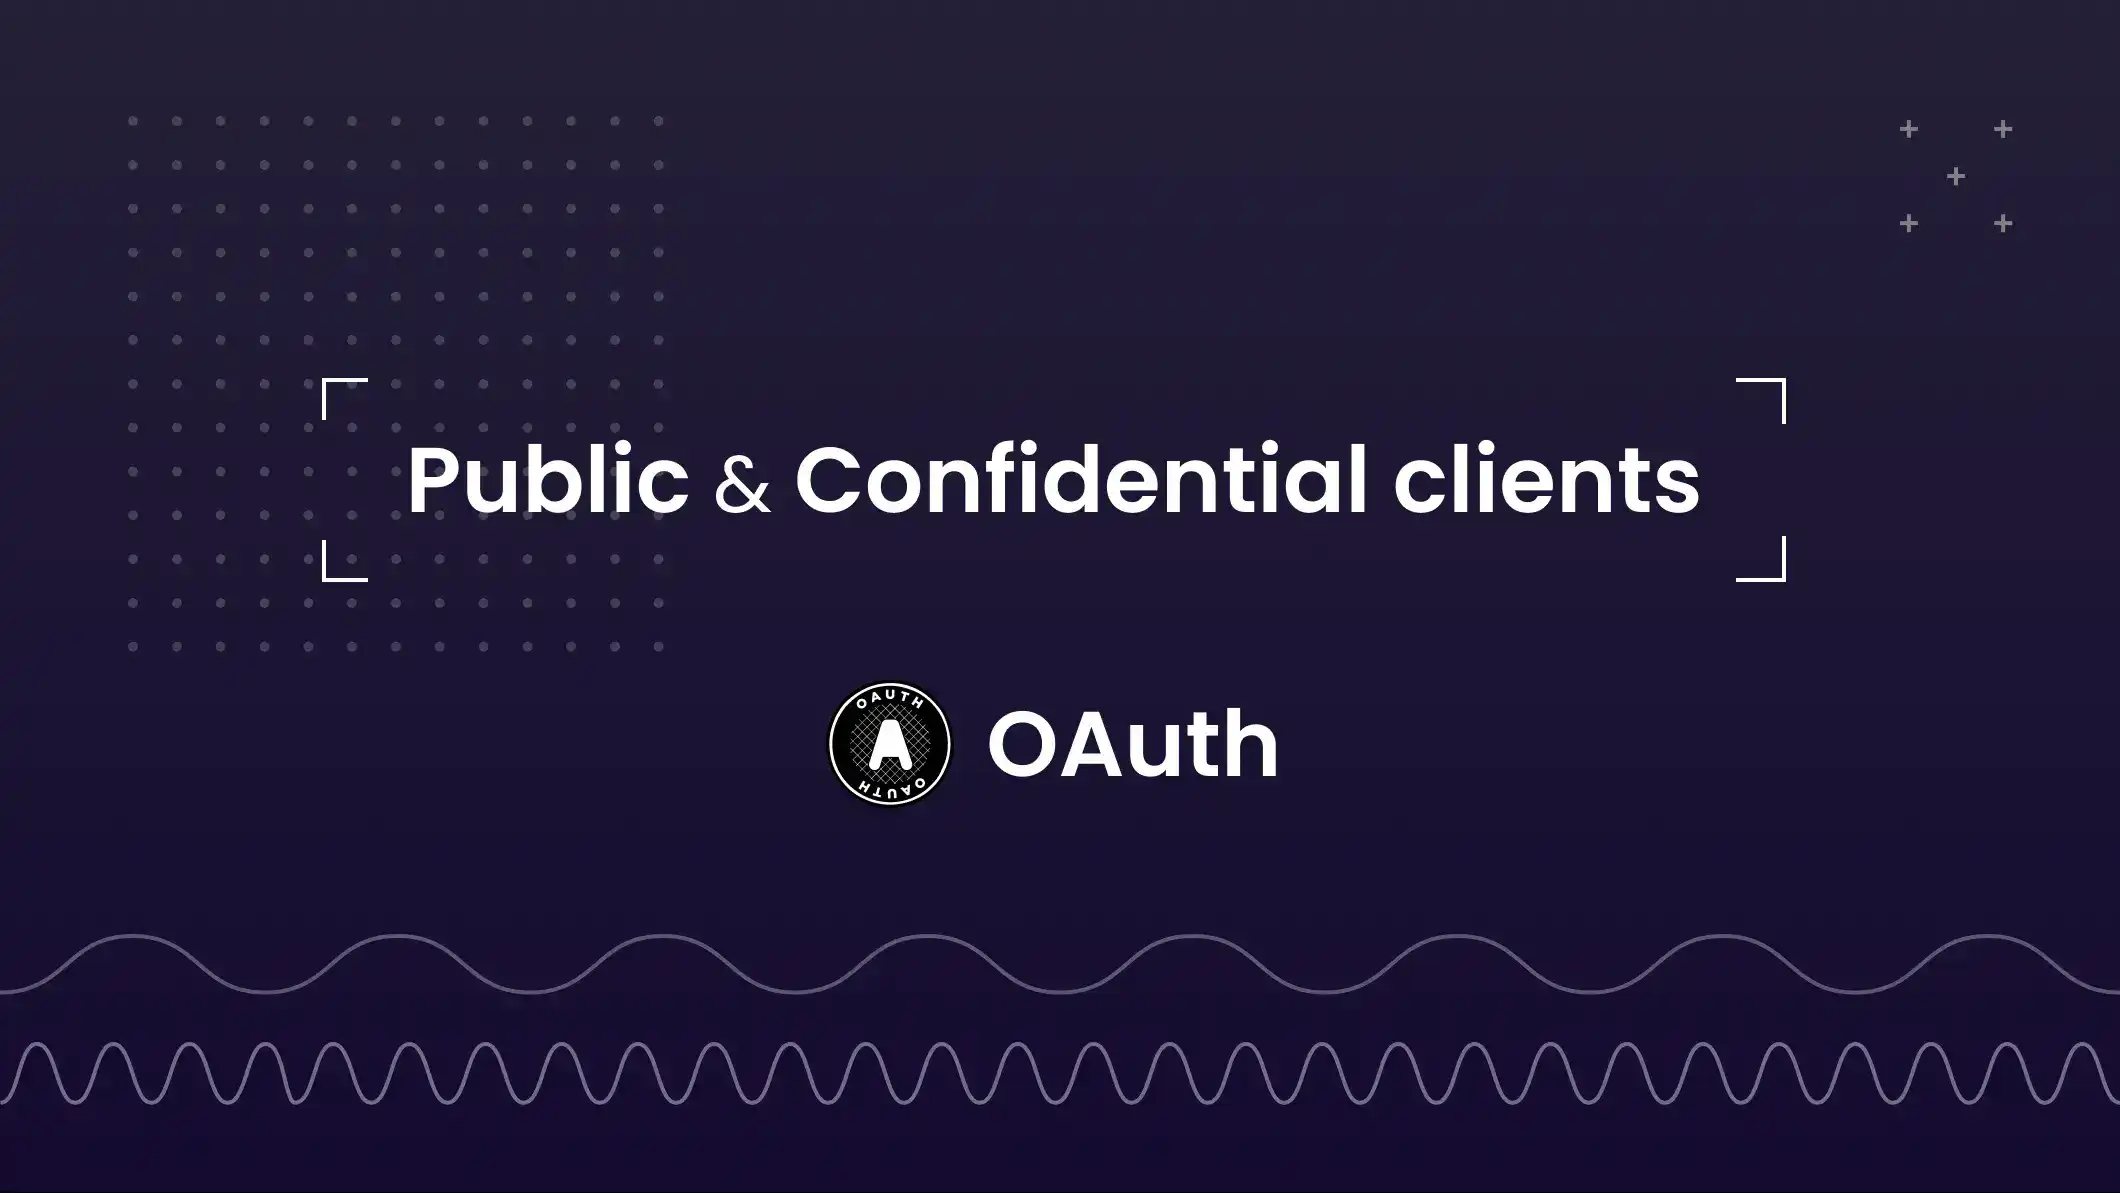 What’s the differences between public & confidential clients?